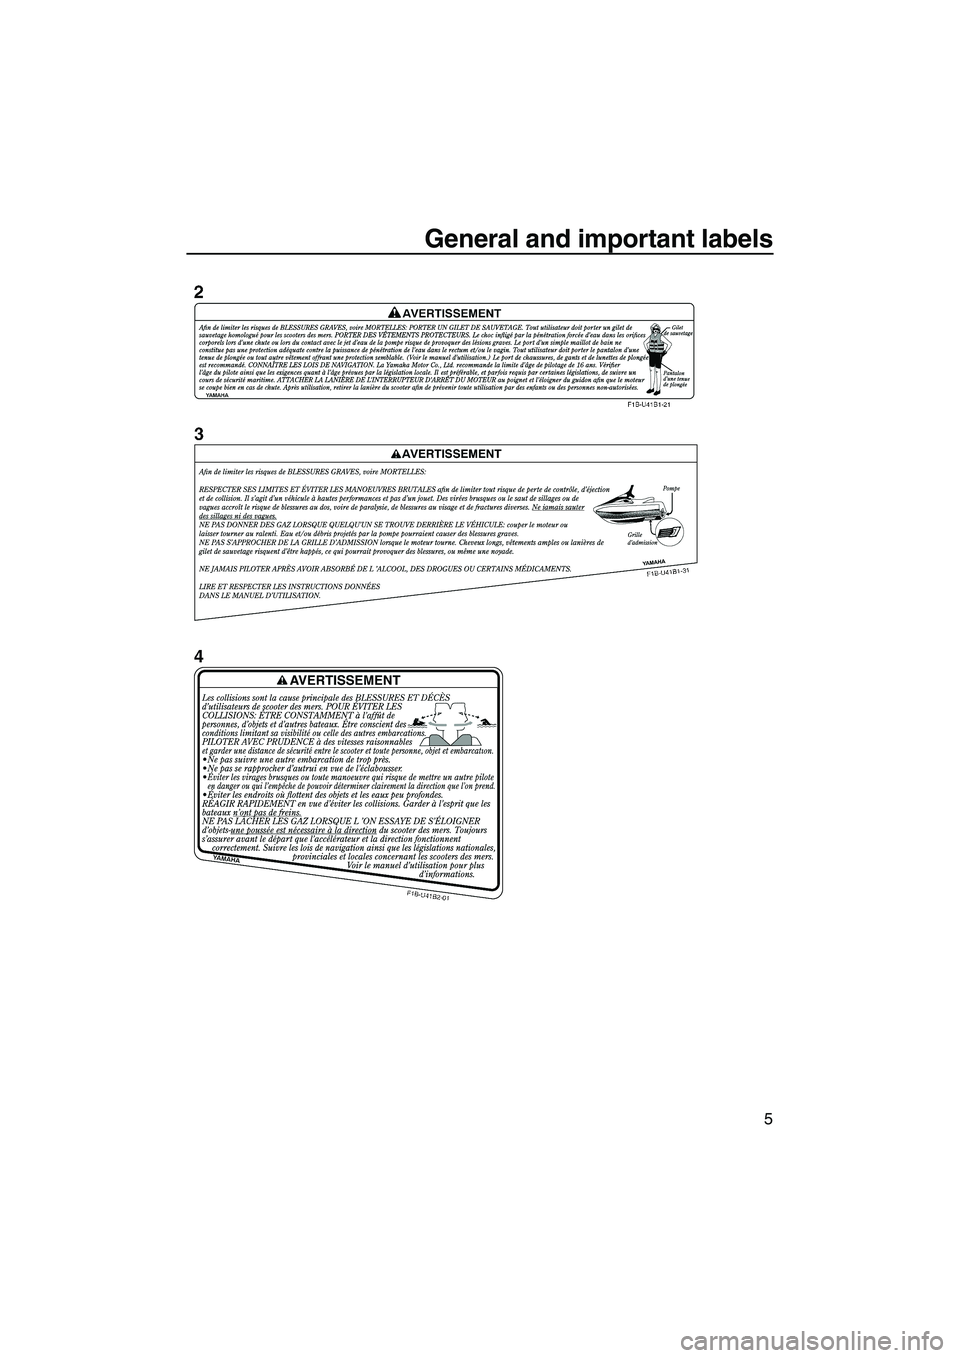 YAMAHA SVHO 2011 User Guide General and important labels
5
UF1W73E0.book  Page 5  Monday, June 7, 2010  9:17 AM 